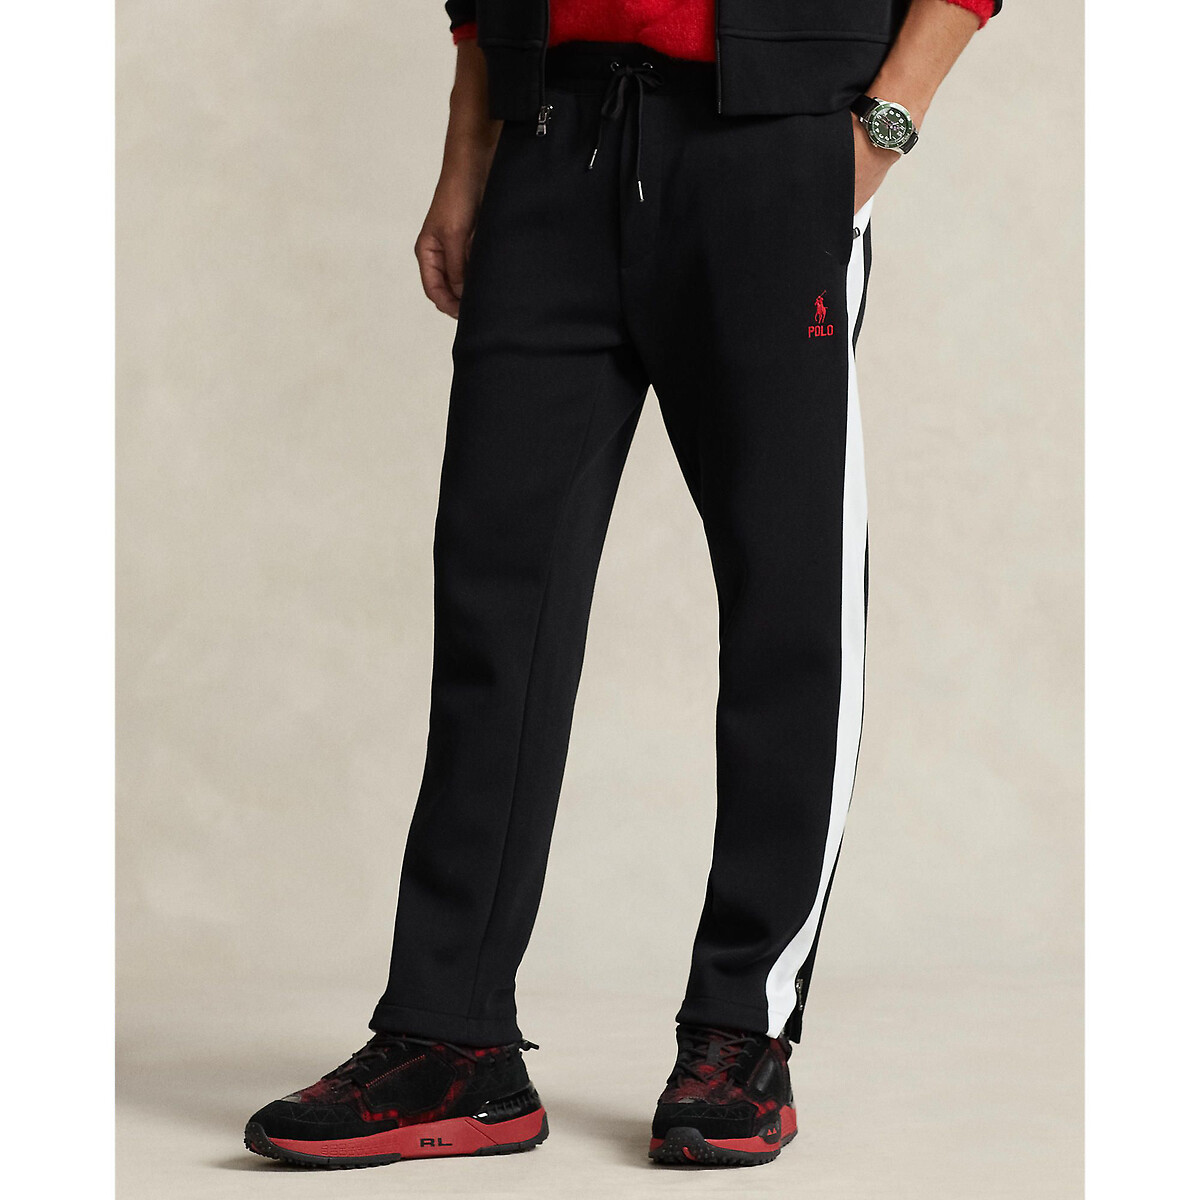 Image of Cotton Mix Joggers with Contrasting Bands